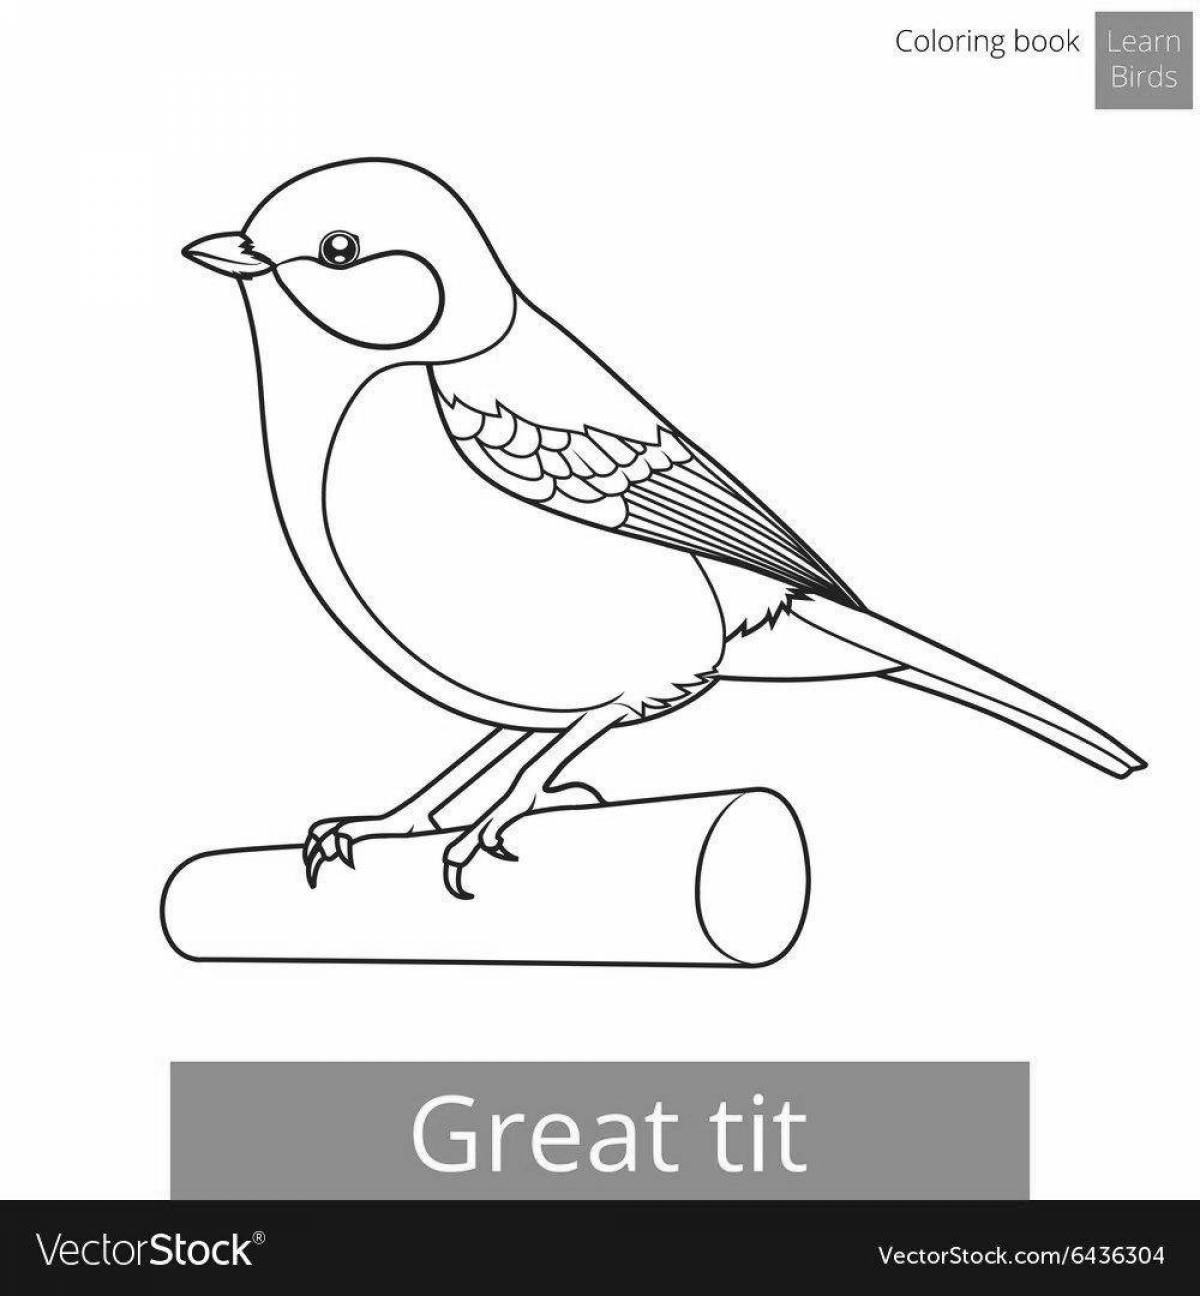 Interesting tit coloring page